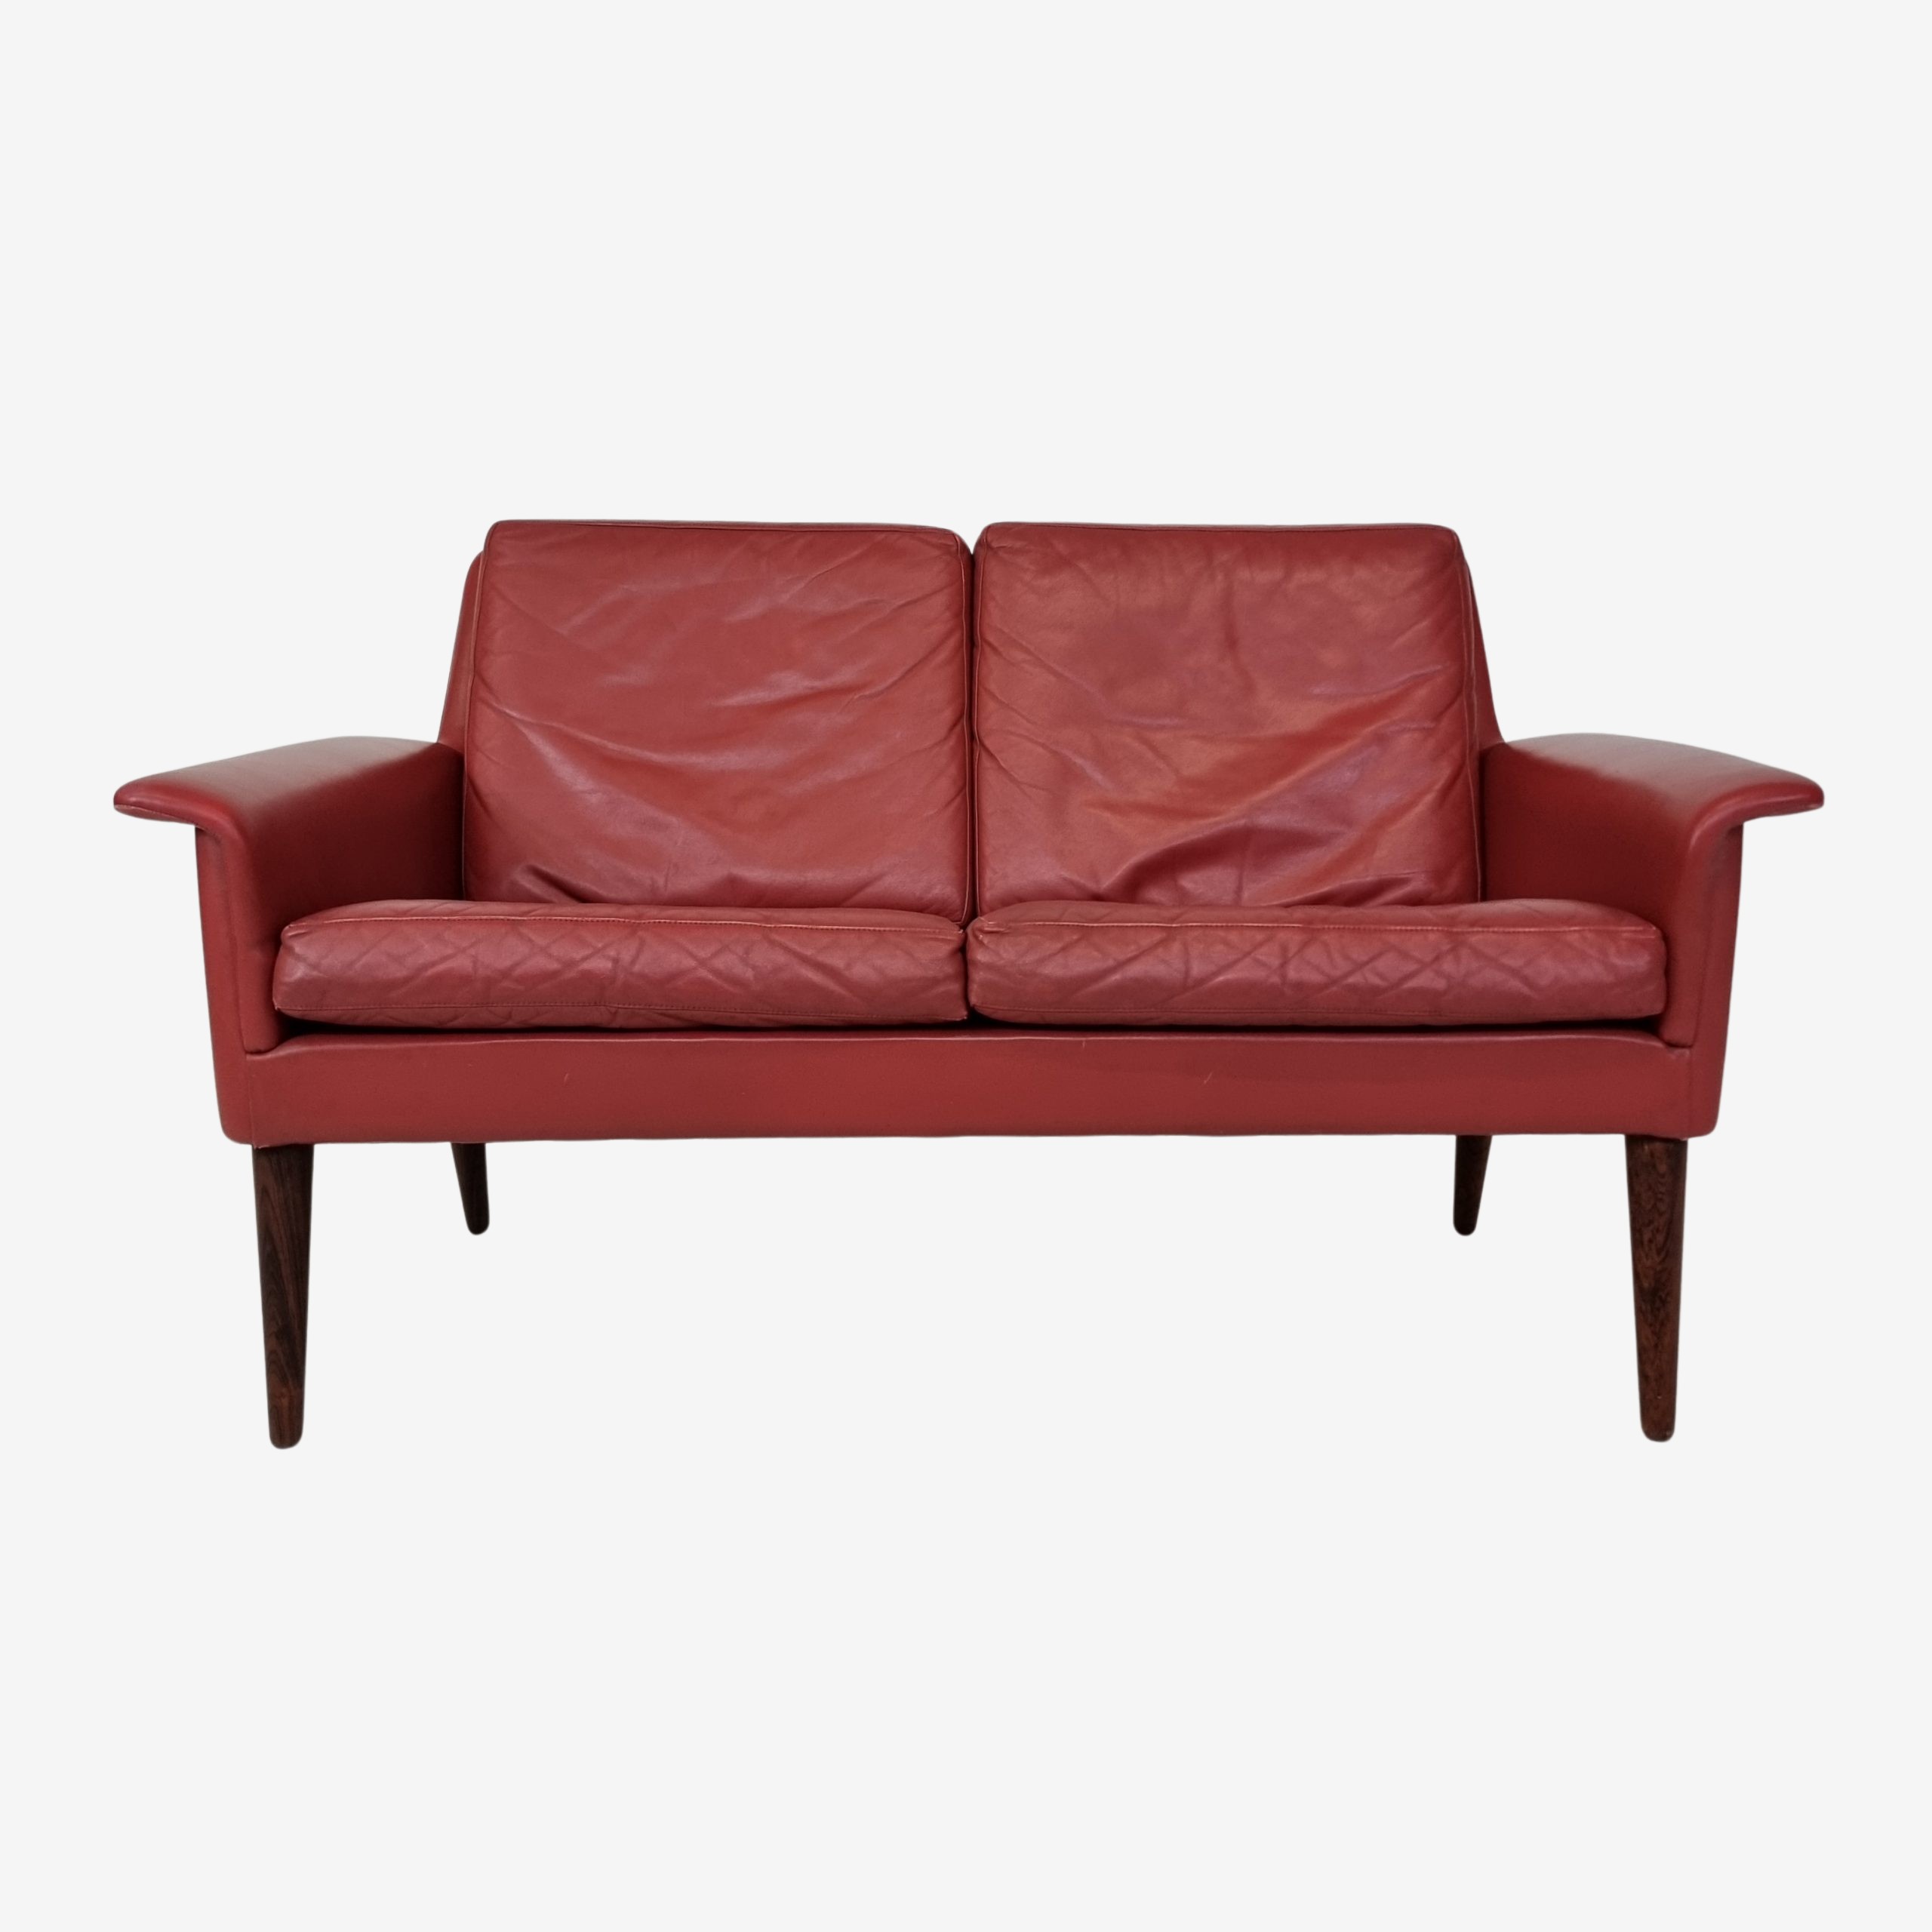 2 pers. Sofa | Leather | Rosewood